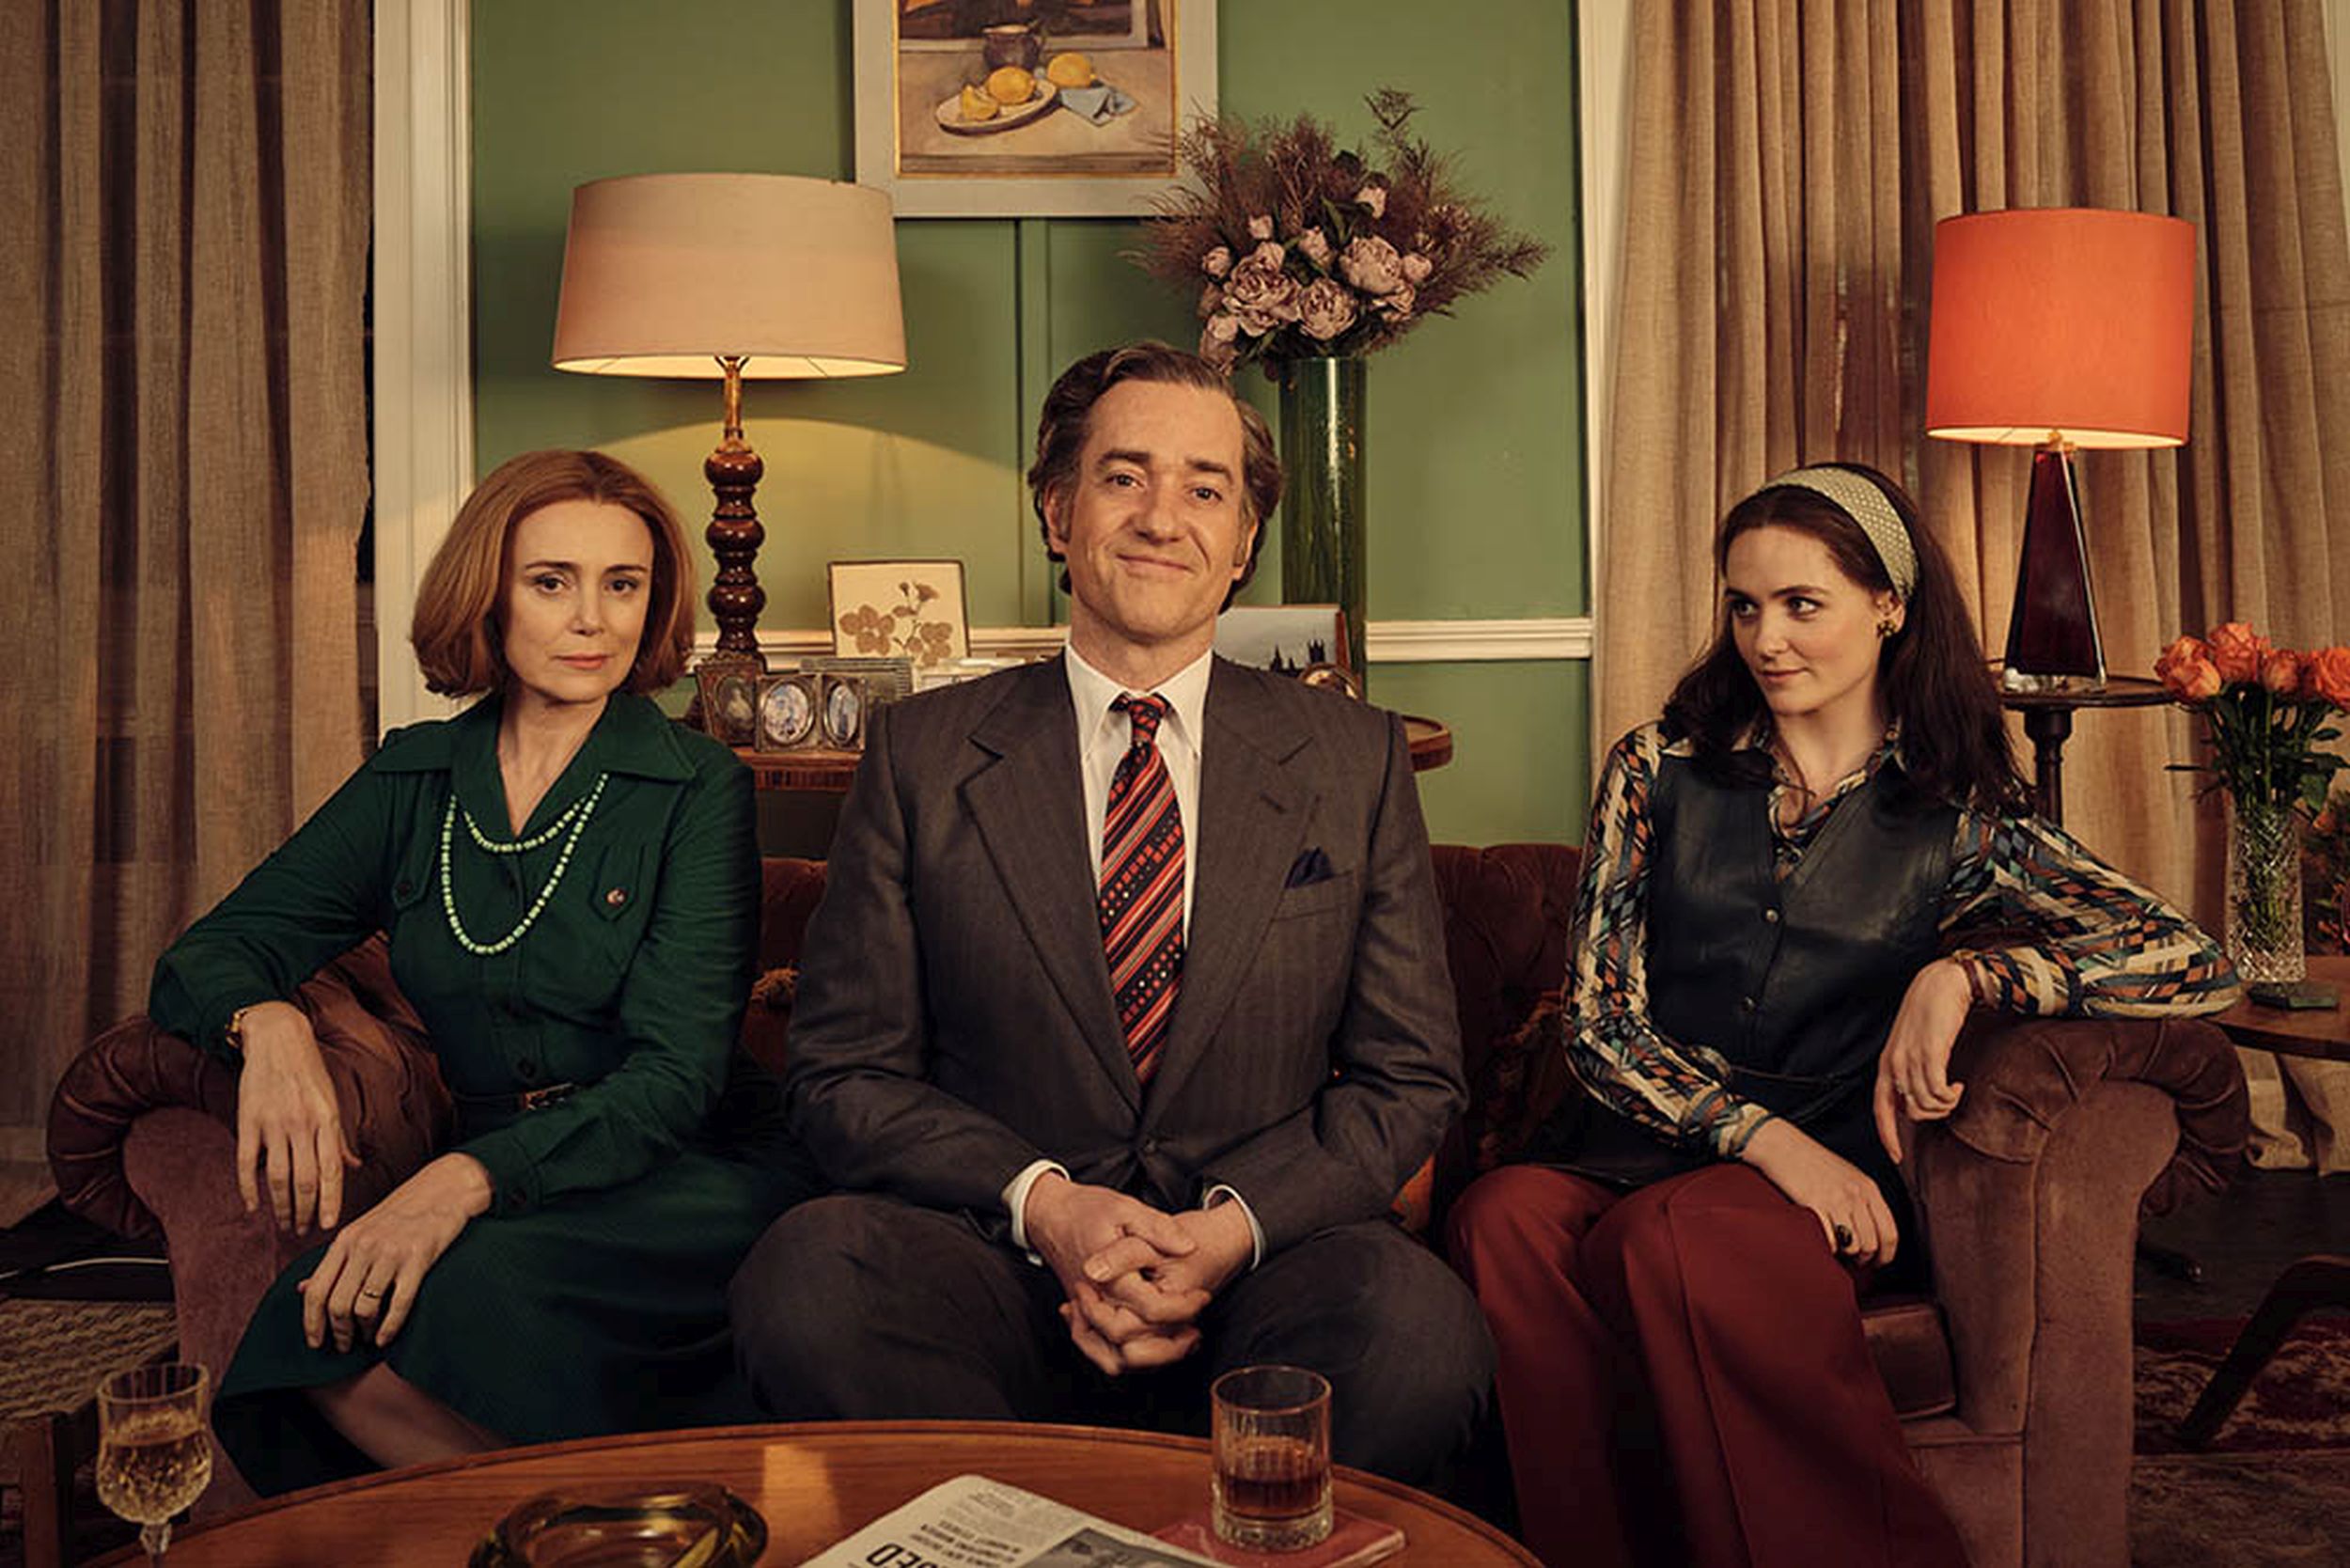 Picture shows: Keeley Hawes as Barbara Stonehouse, Matthew Macfadyen as John Stonehouse, and Emer Heatley as Sheila Buckley in 'Stonehouse'